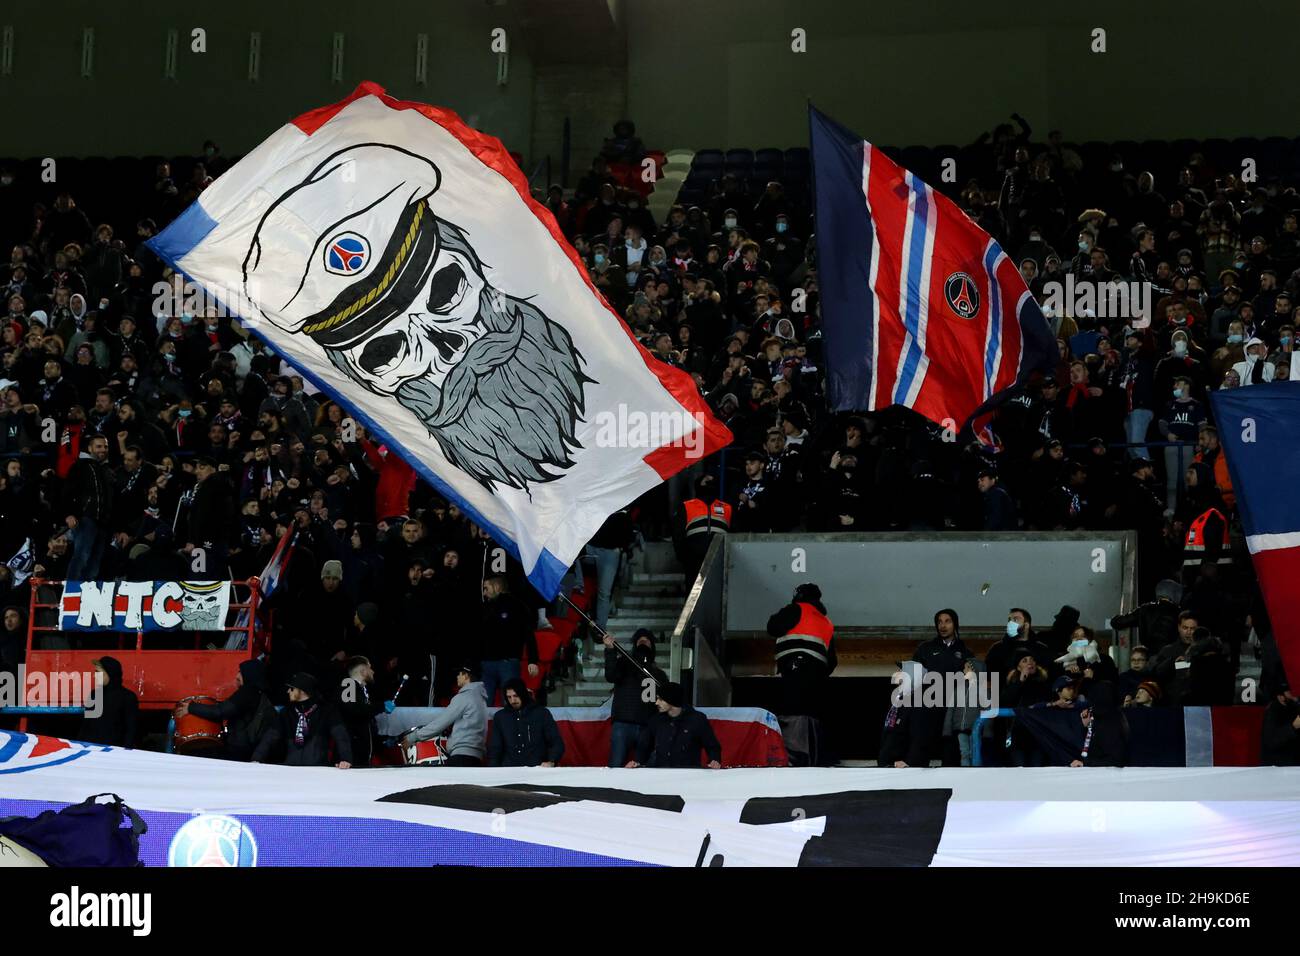 Club Brugge ultras in away stand during Lens-Lille crowd trouble